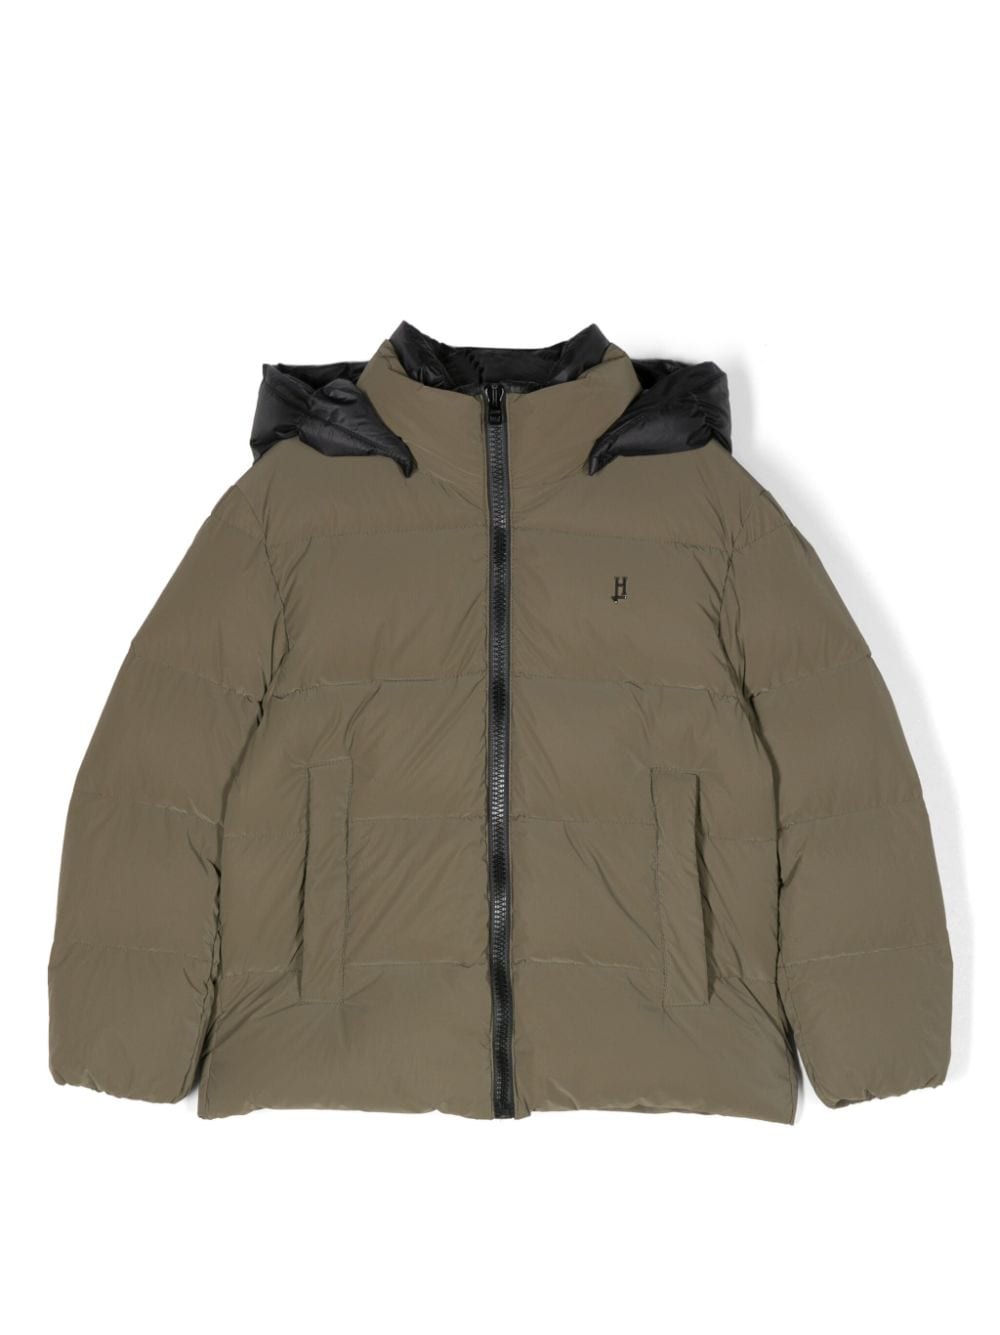 Herno Kids' Hooded Padded Jacket In Green